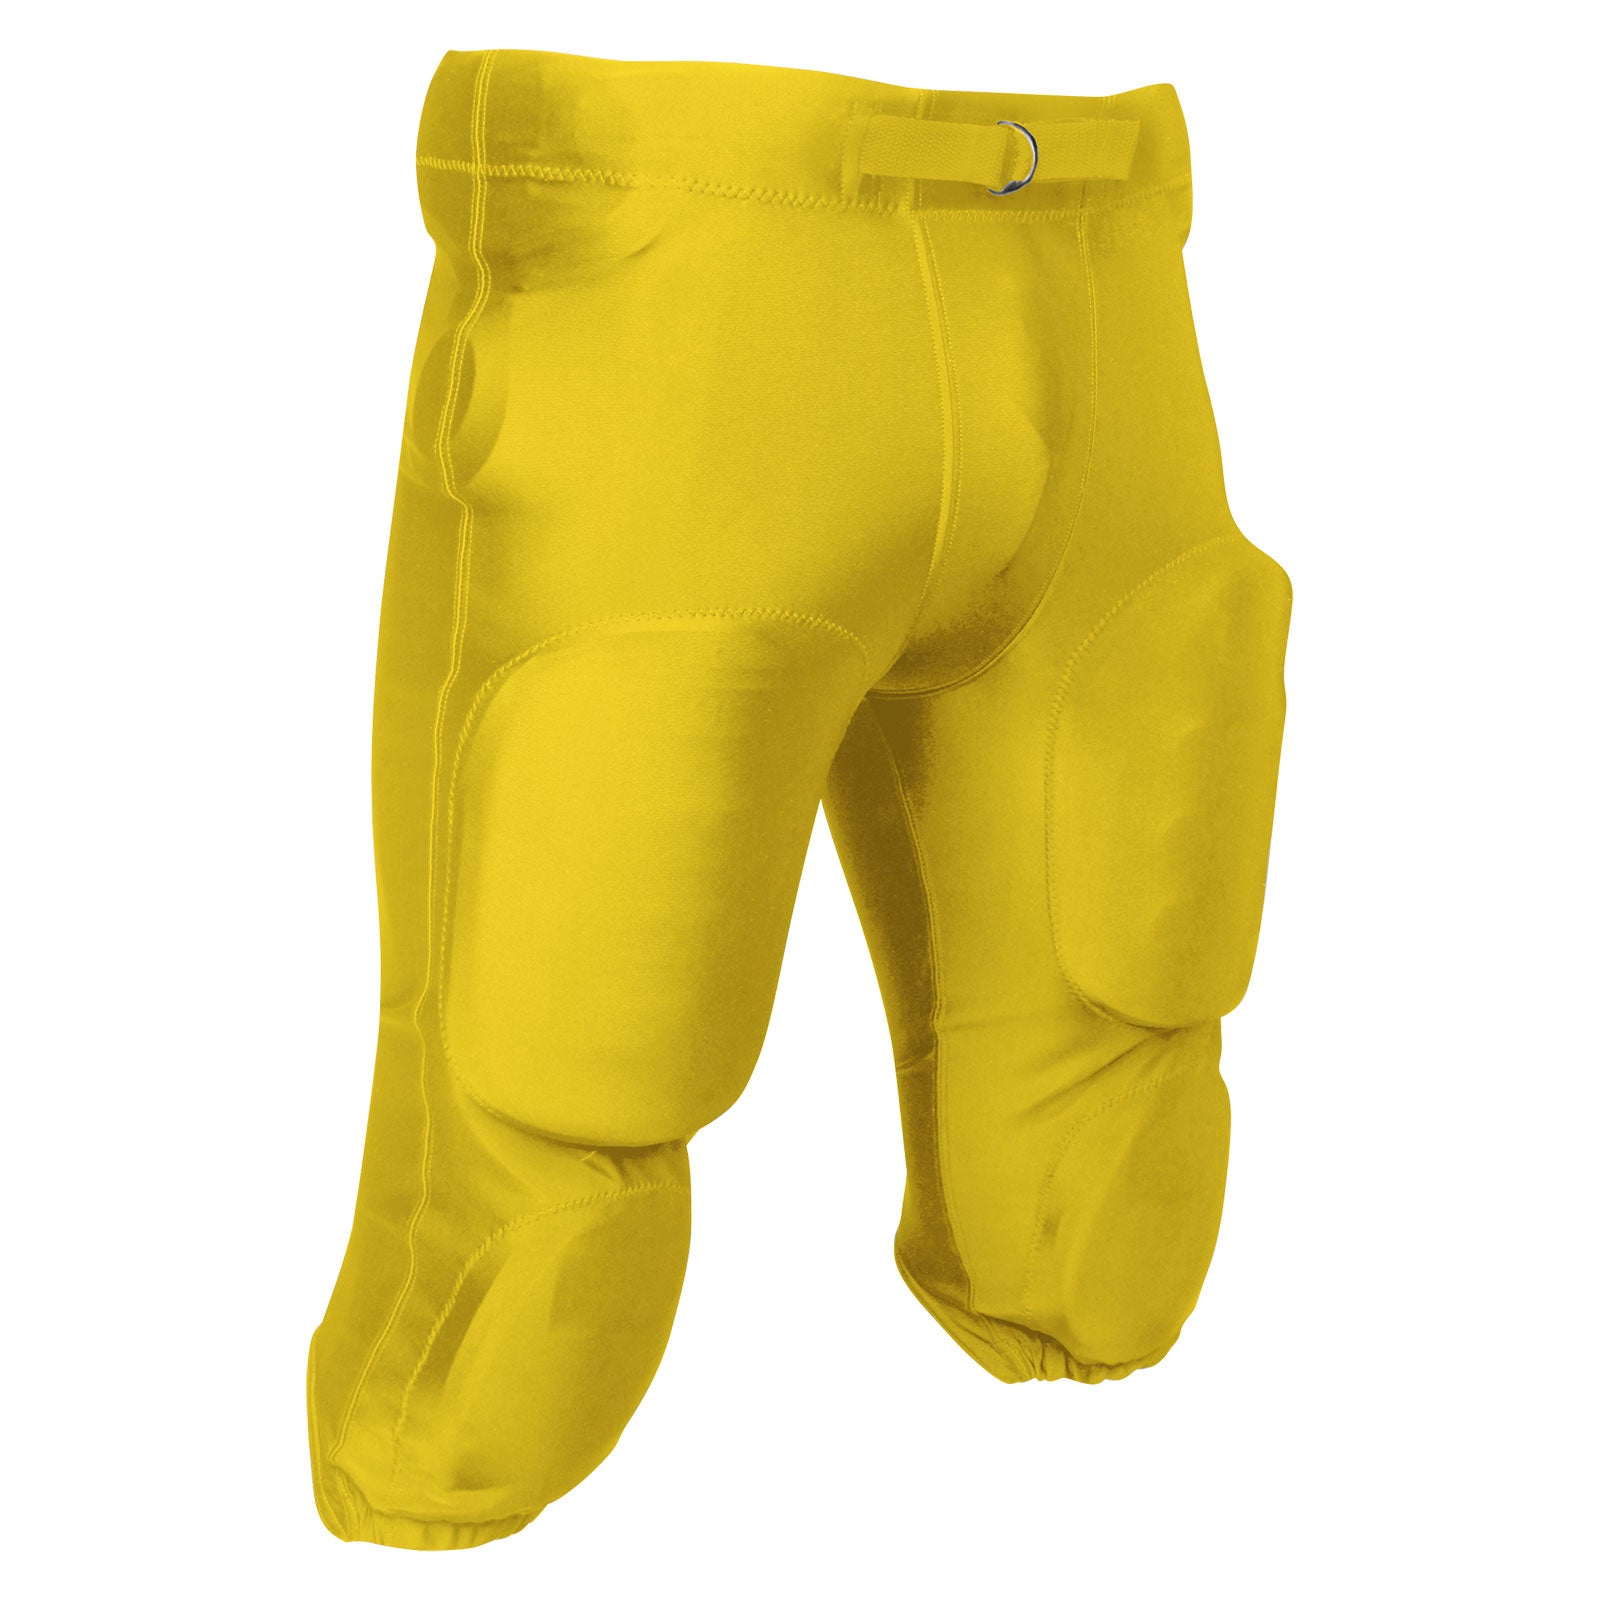 Traditional Football Pant With Pad Pockets GOLD BODY